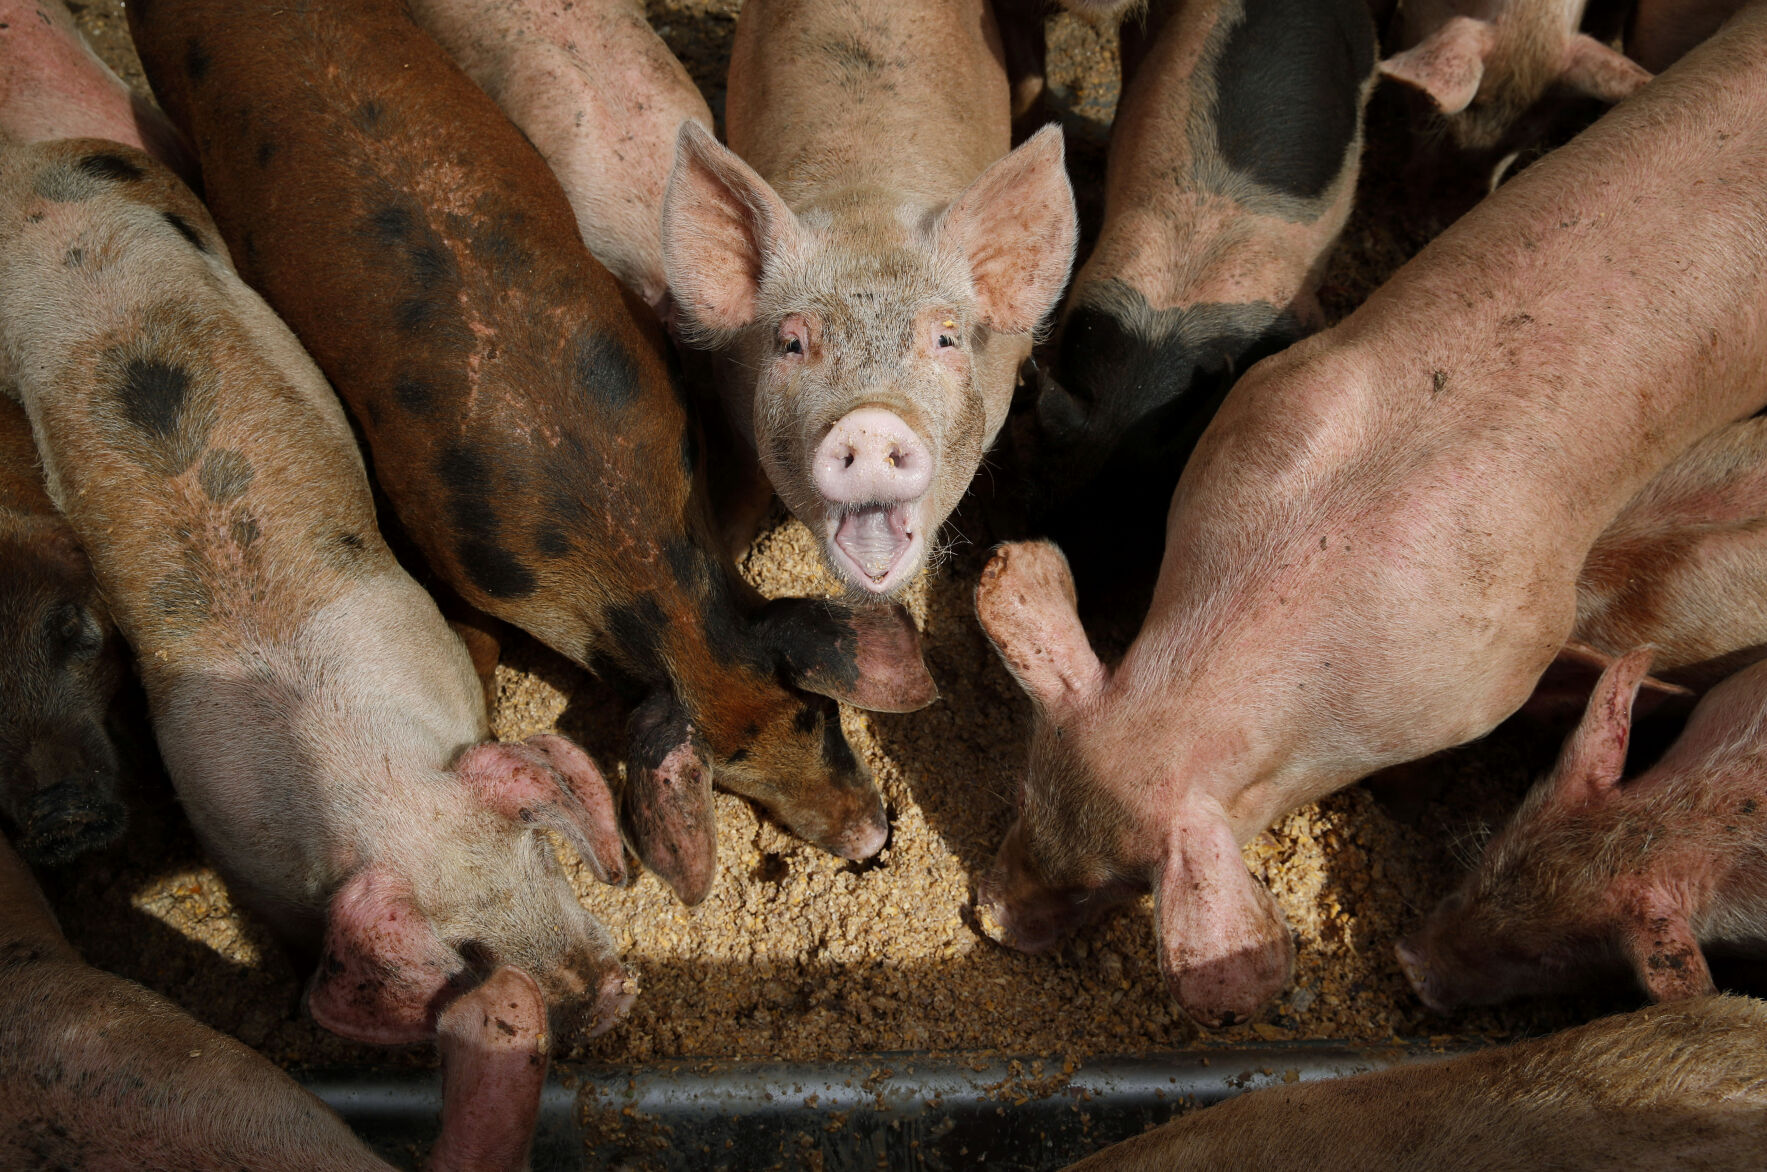 <p>FILE - Pigs eat from a trough at the Las Vegas Livestock pig farm, April 2, 2019, in Las Vegas. On Friday, Sept. 8, 2023, a coalition of civil society groups filed a lawsuit seeking to force the Environmental Protection Agency to strengthen its regulation of large livestock operations that release pollutants into waterways. (AP Photo/John Locher, File)</p>   PHOTO CREDIT: John Locher 